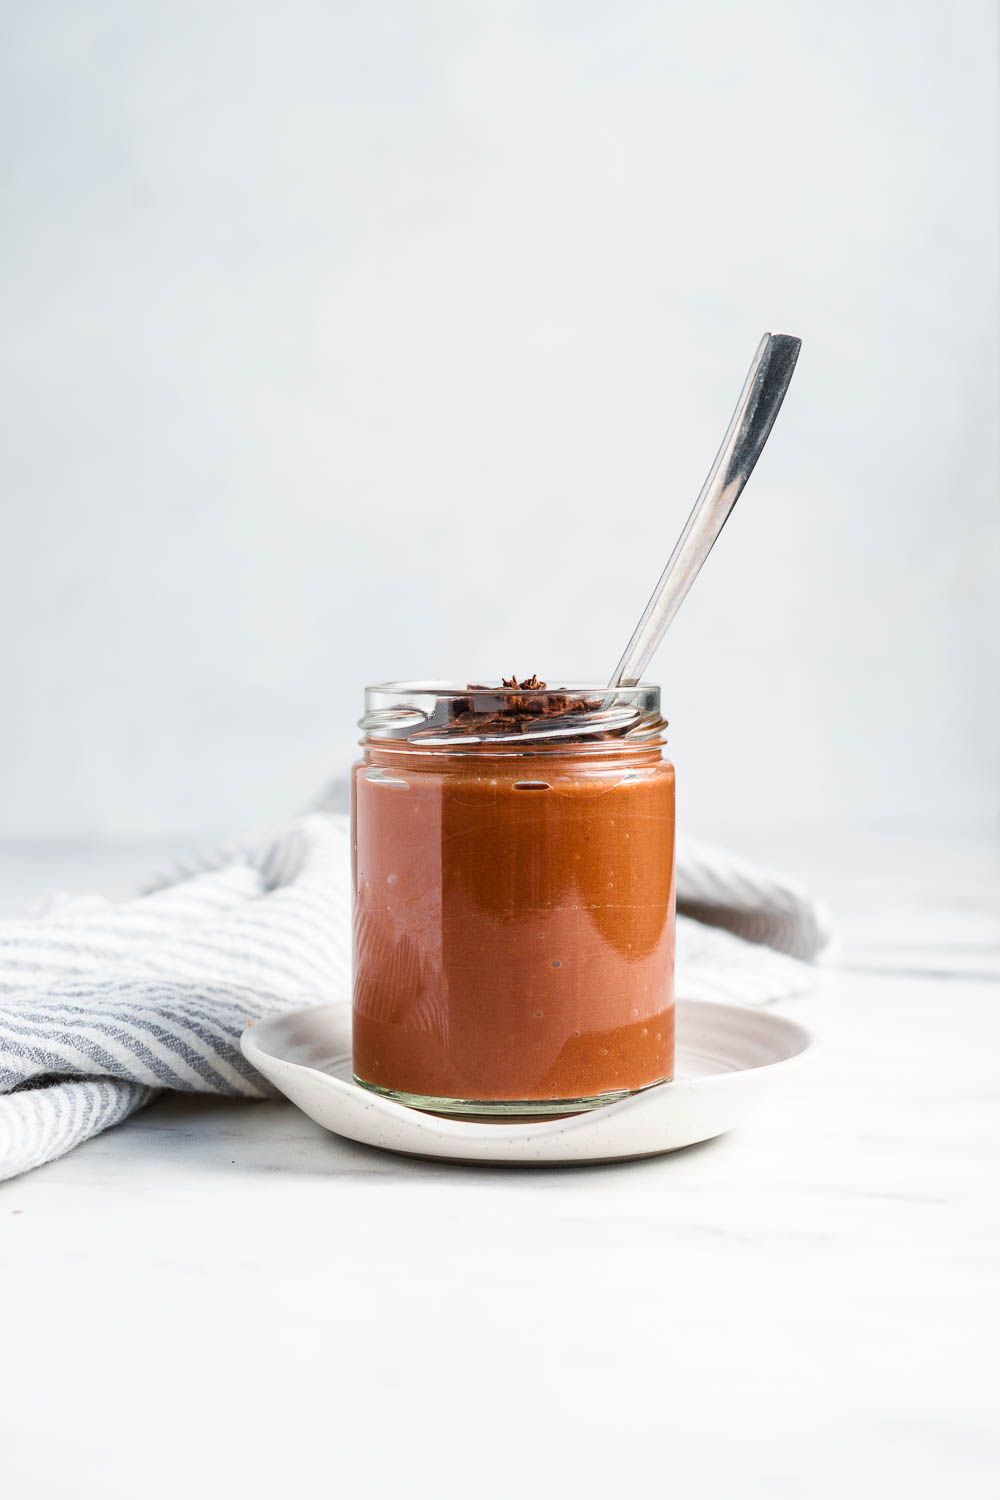 Low Carb Chocolate Pudding with Chopped Dark Chocolate